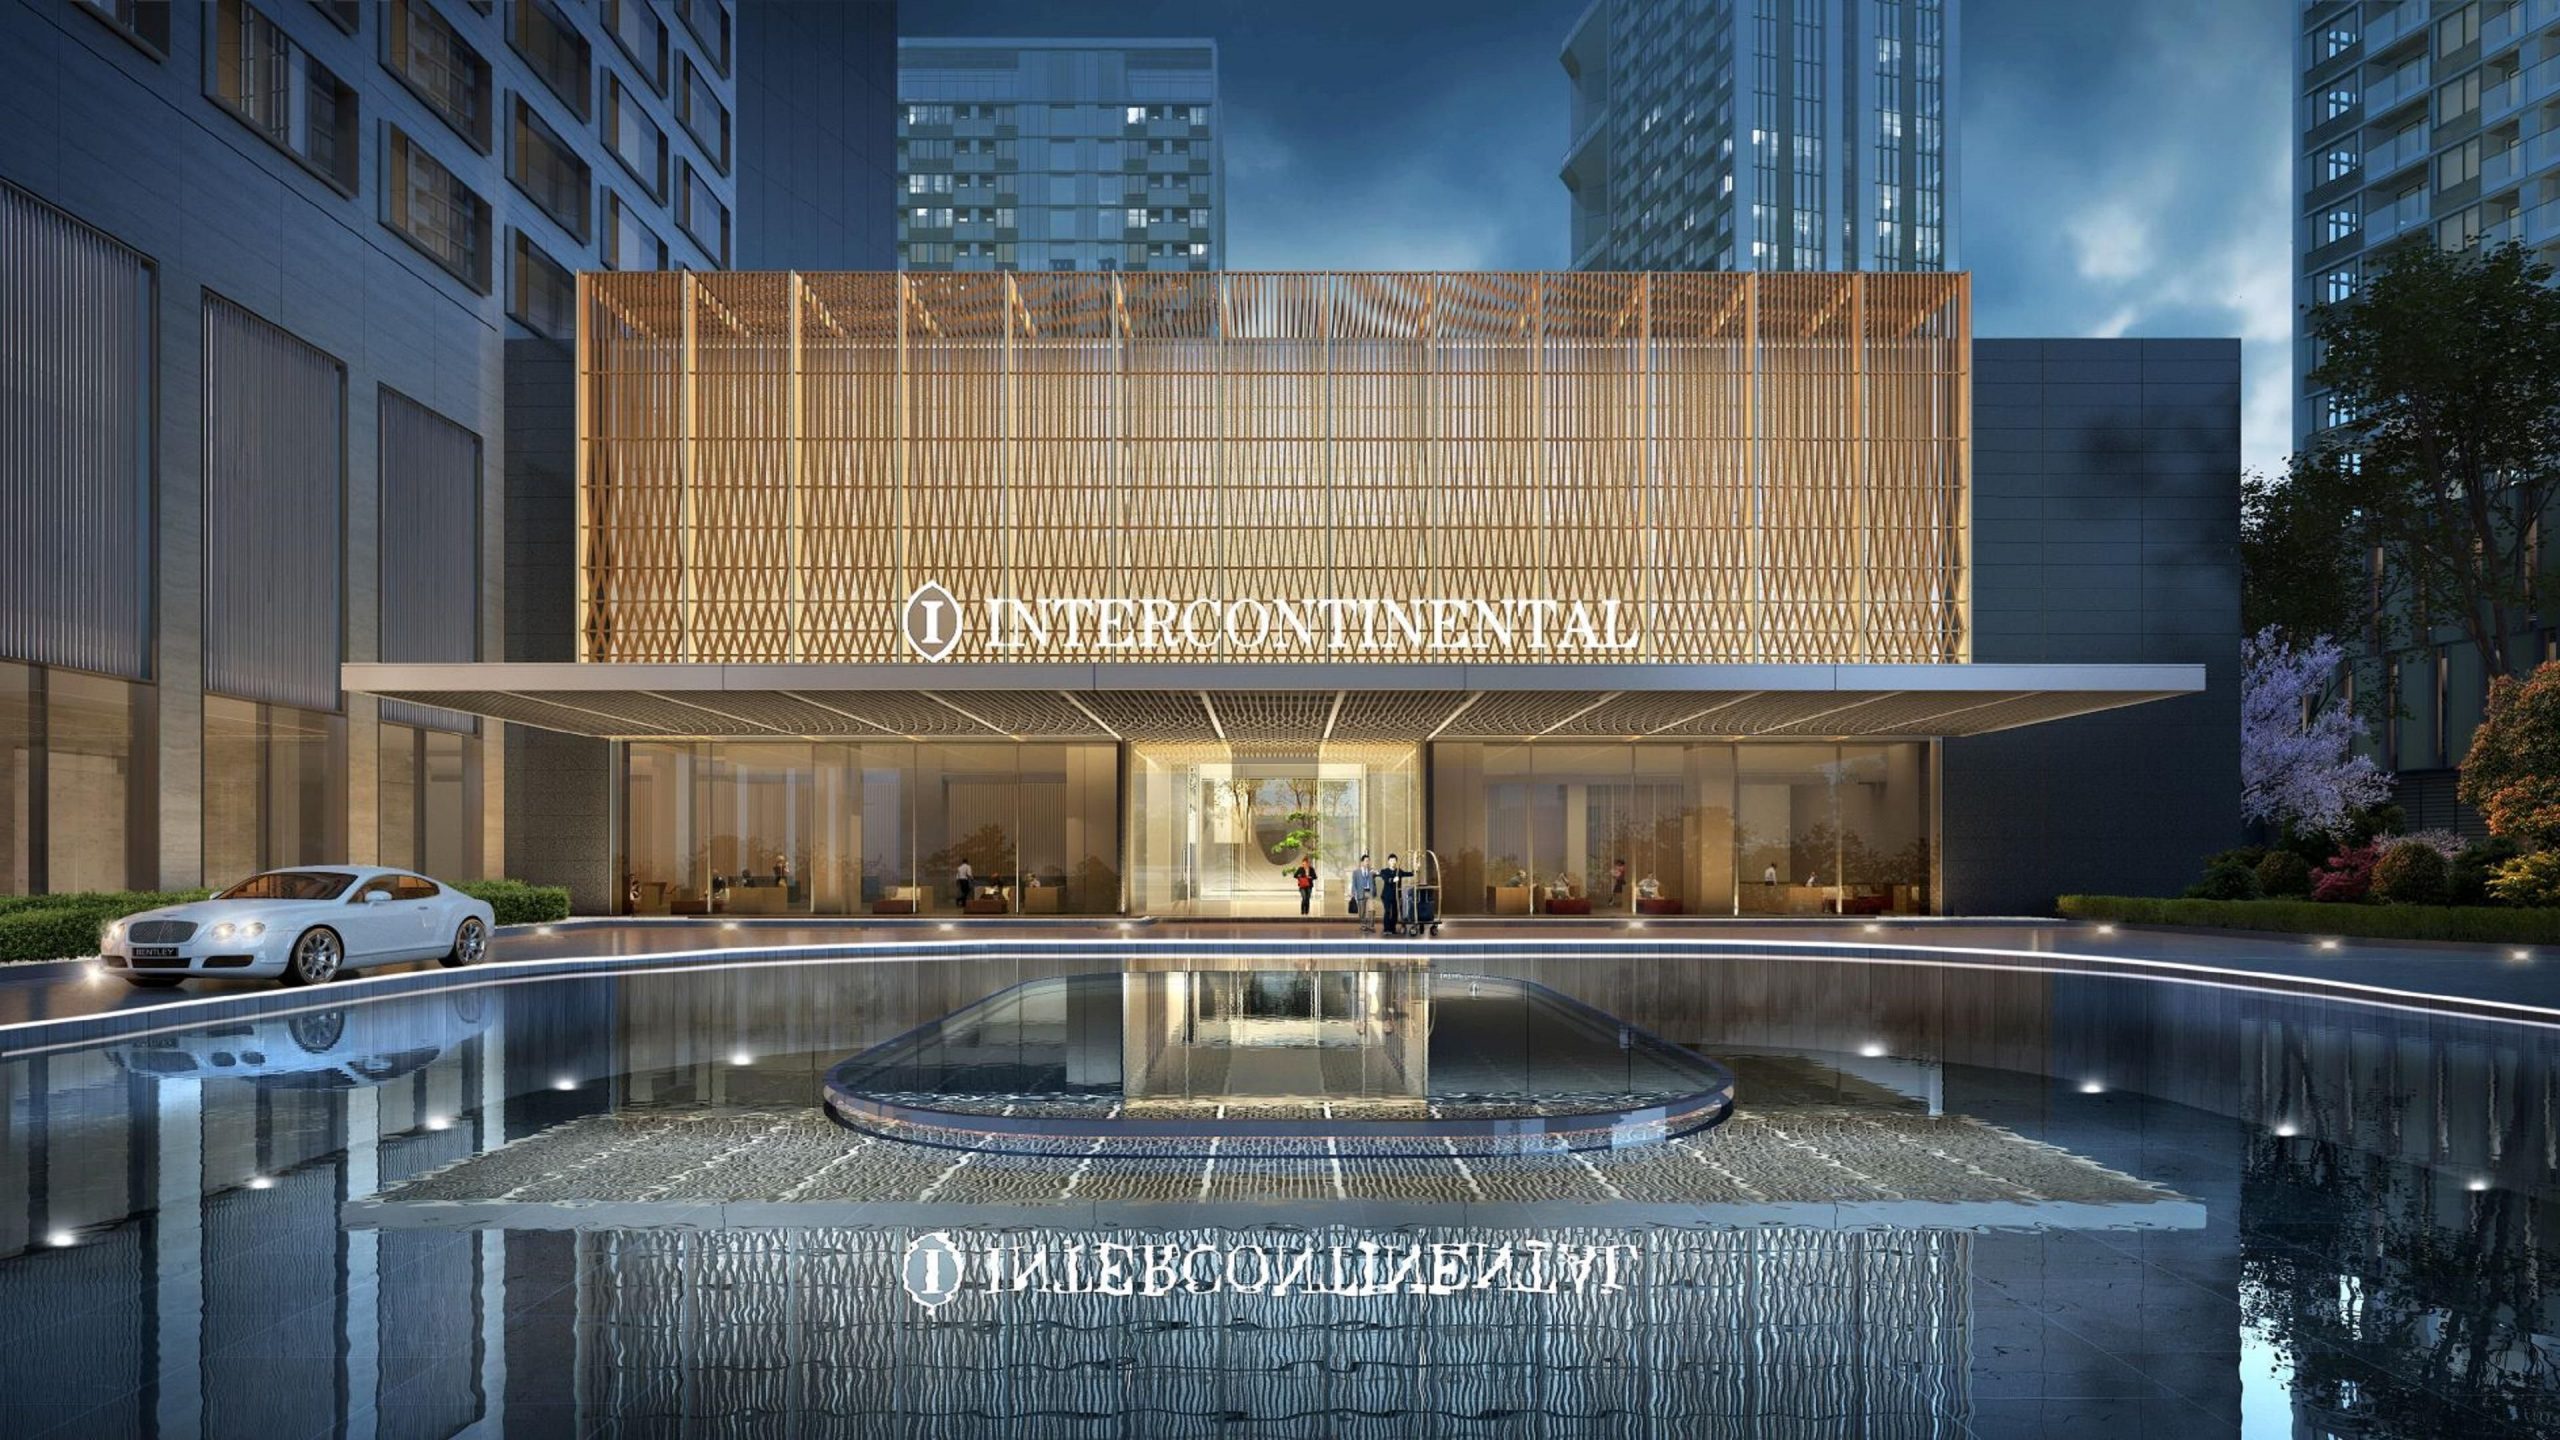 A new Intercontinental hotel opens its doors in Shenzhen